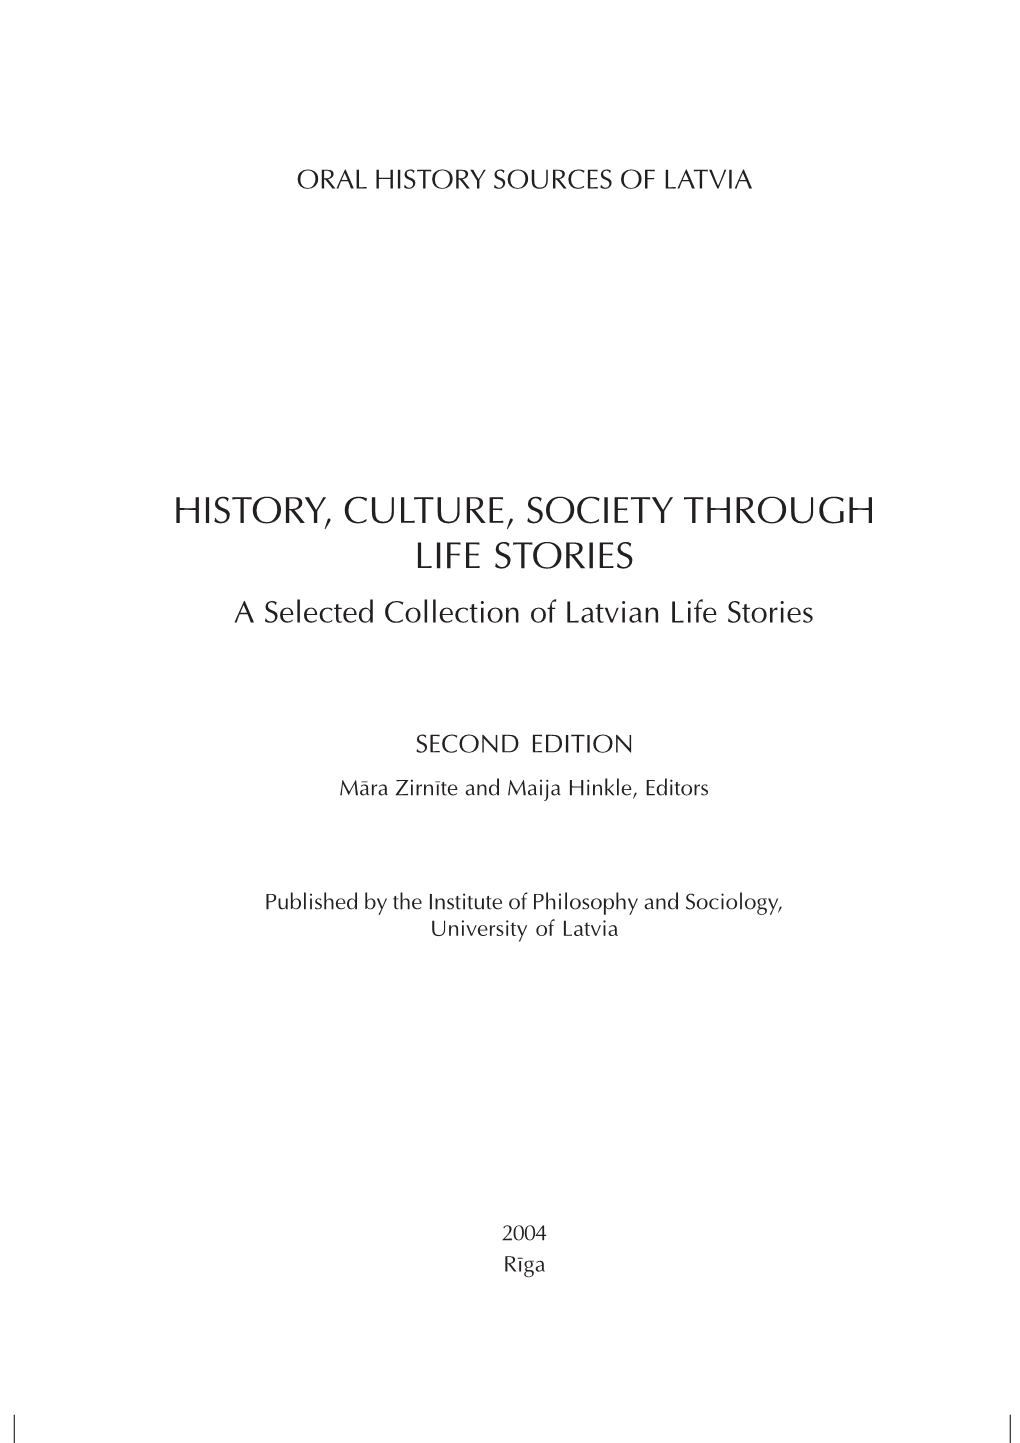 HISTORY, CULTURE, SOCIETY THROUGH LIFE STORIES a Selected Collection of Latvian Life Stories